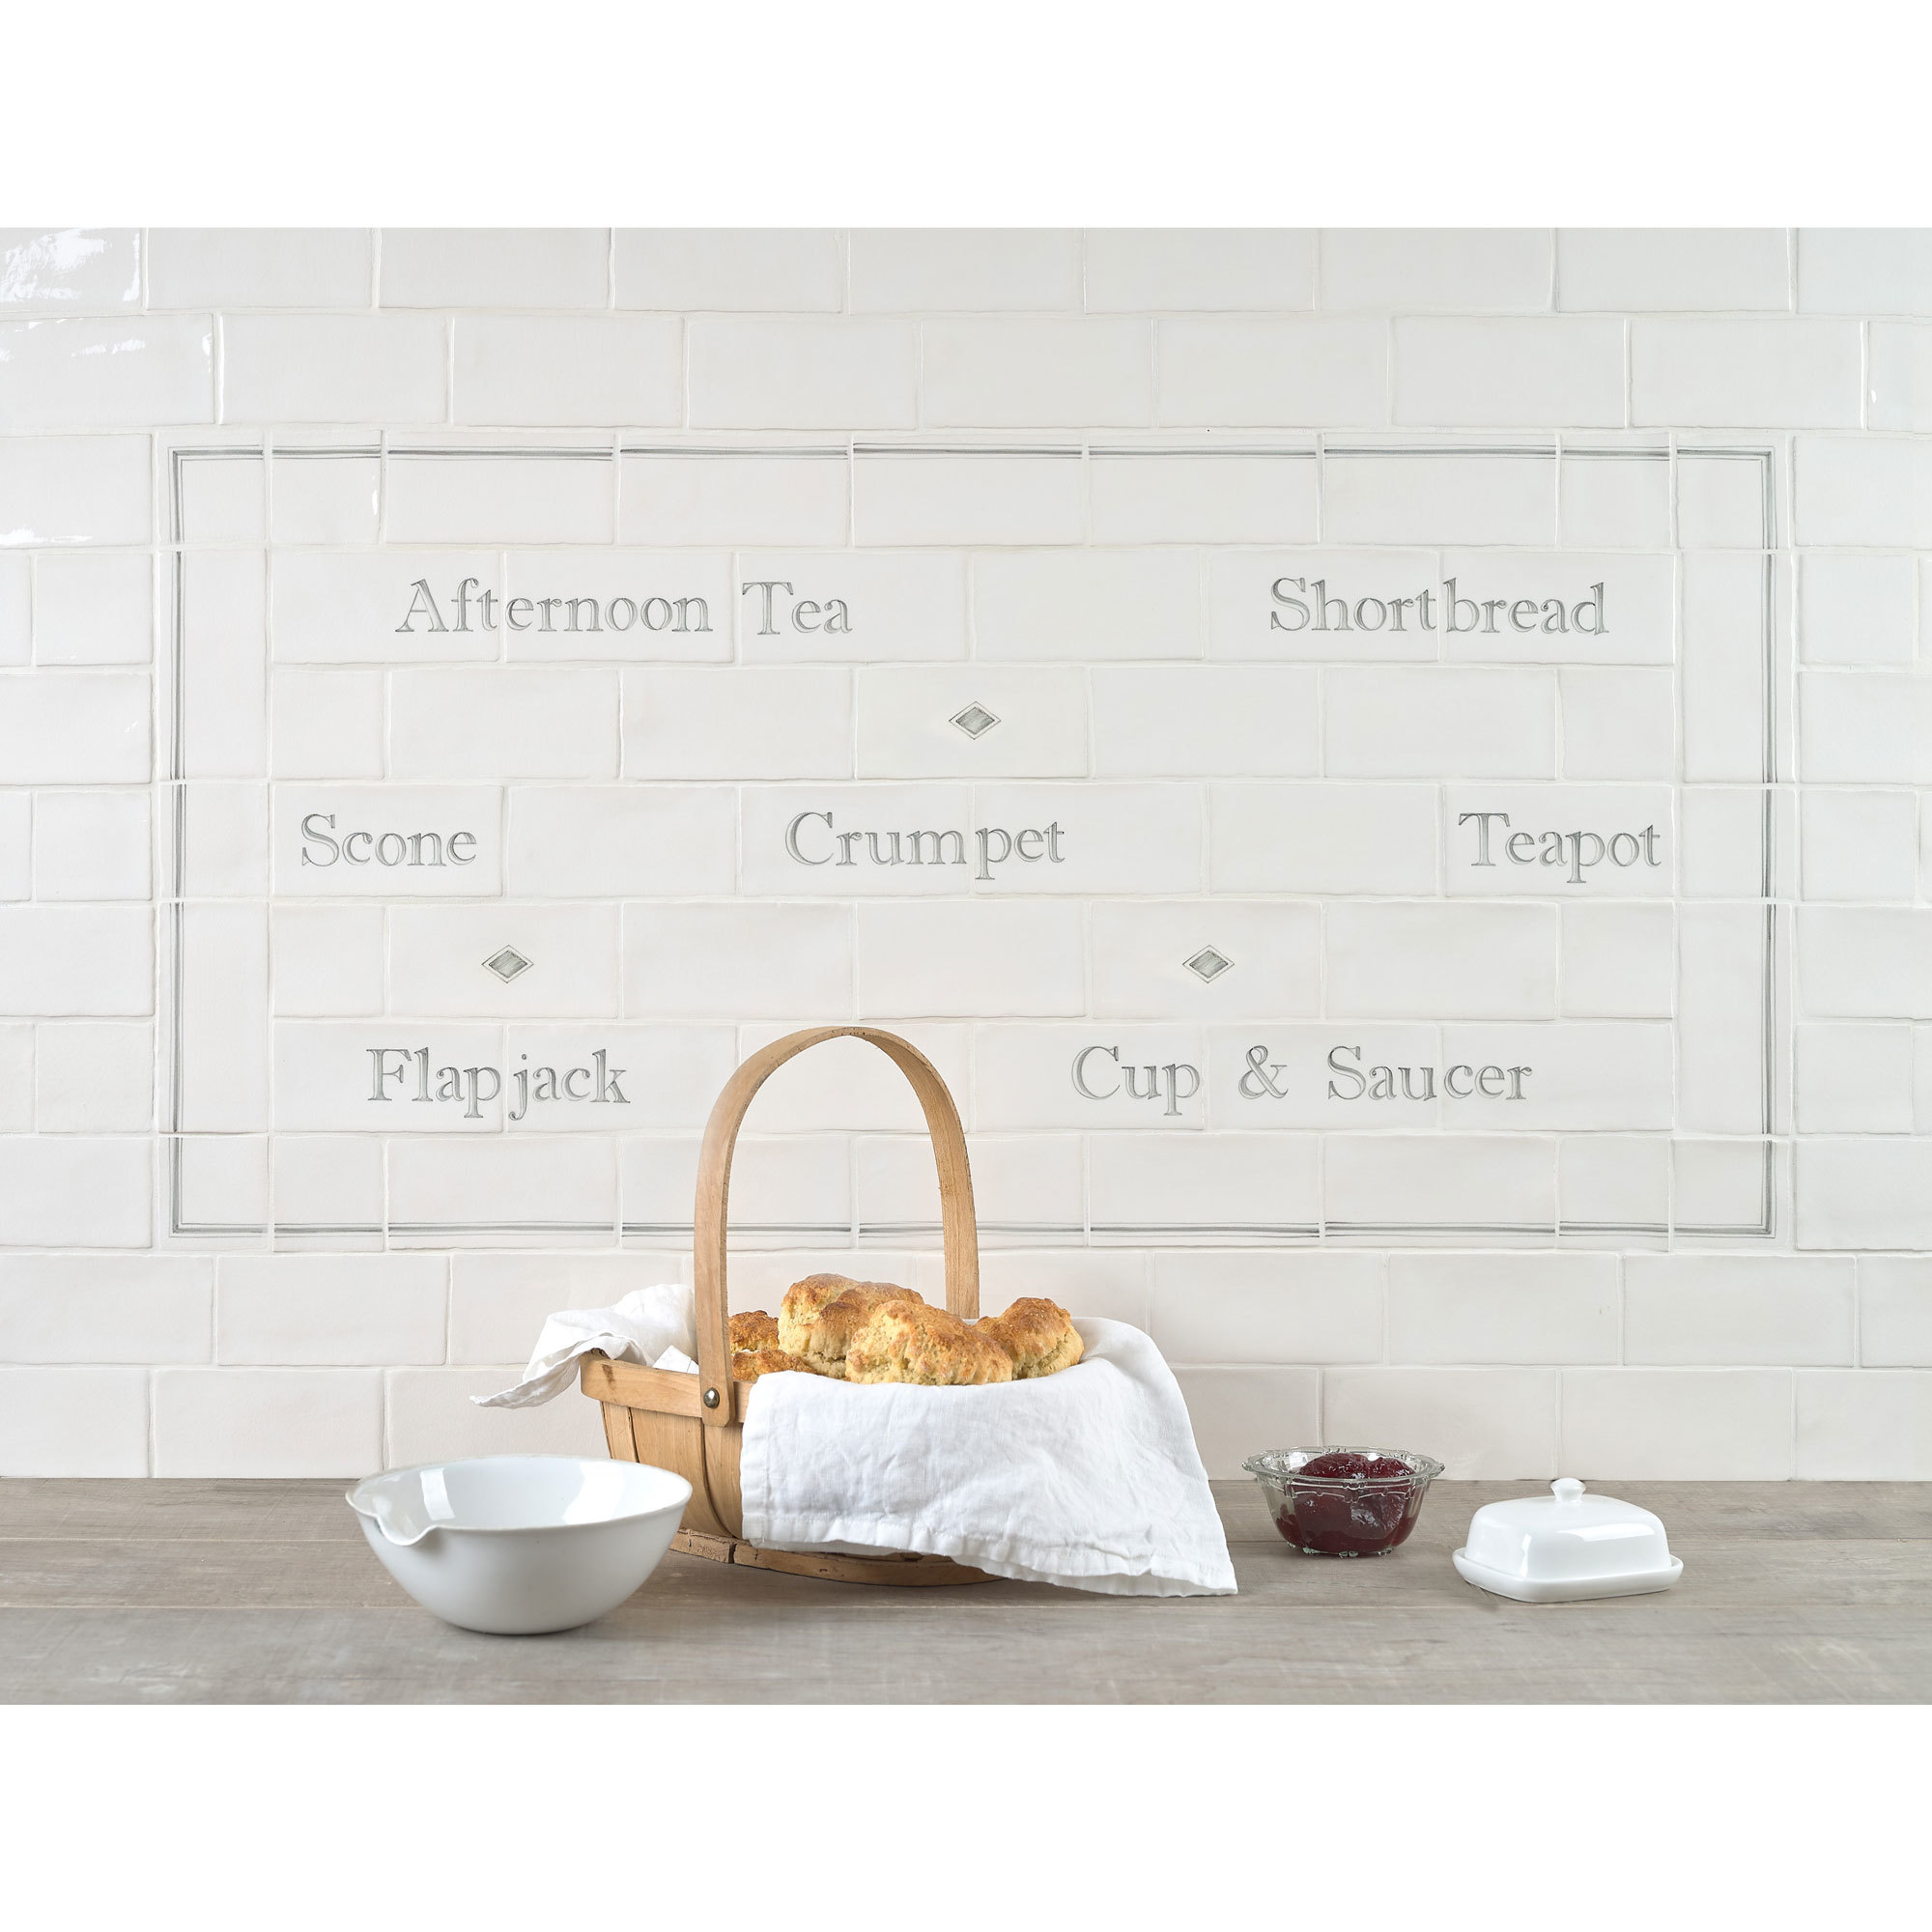 Afternoon Tea Panel with Diamond Decors, product variant image